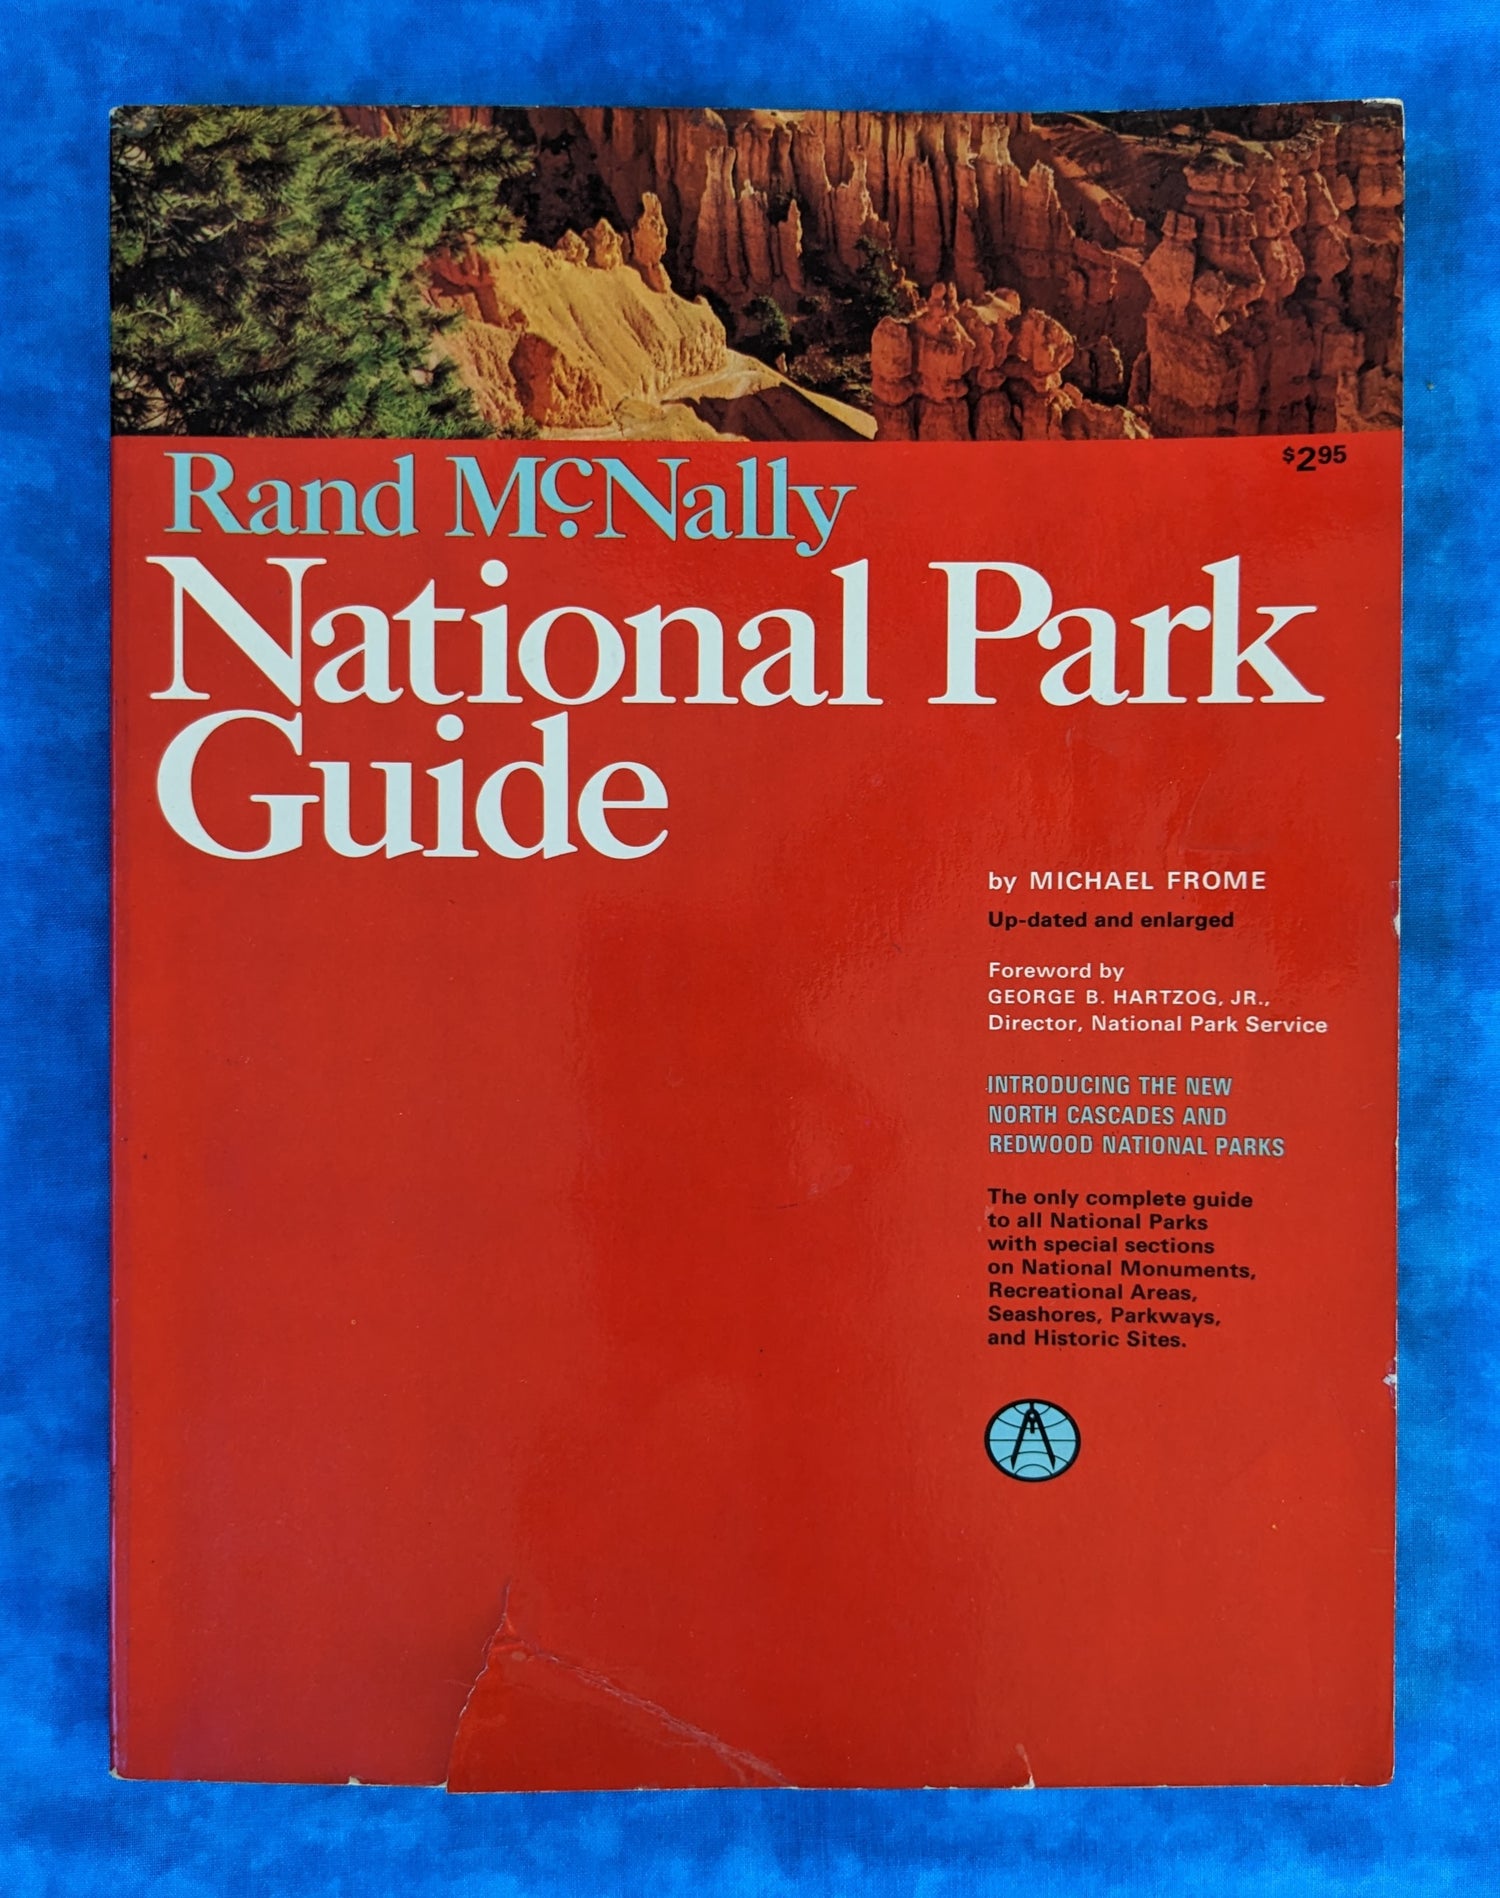 Rand McNally National Park Guide vintage book front cover